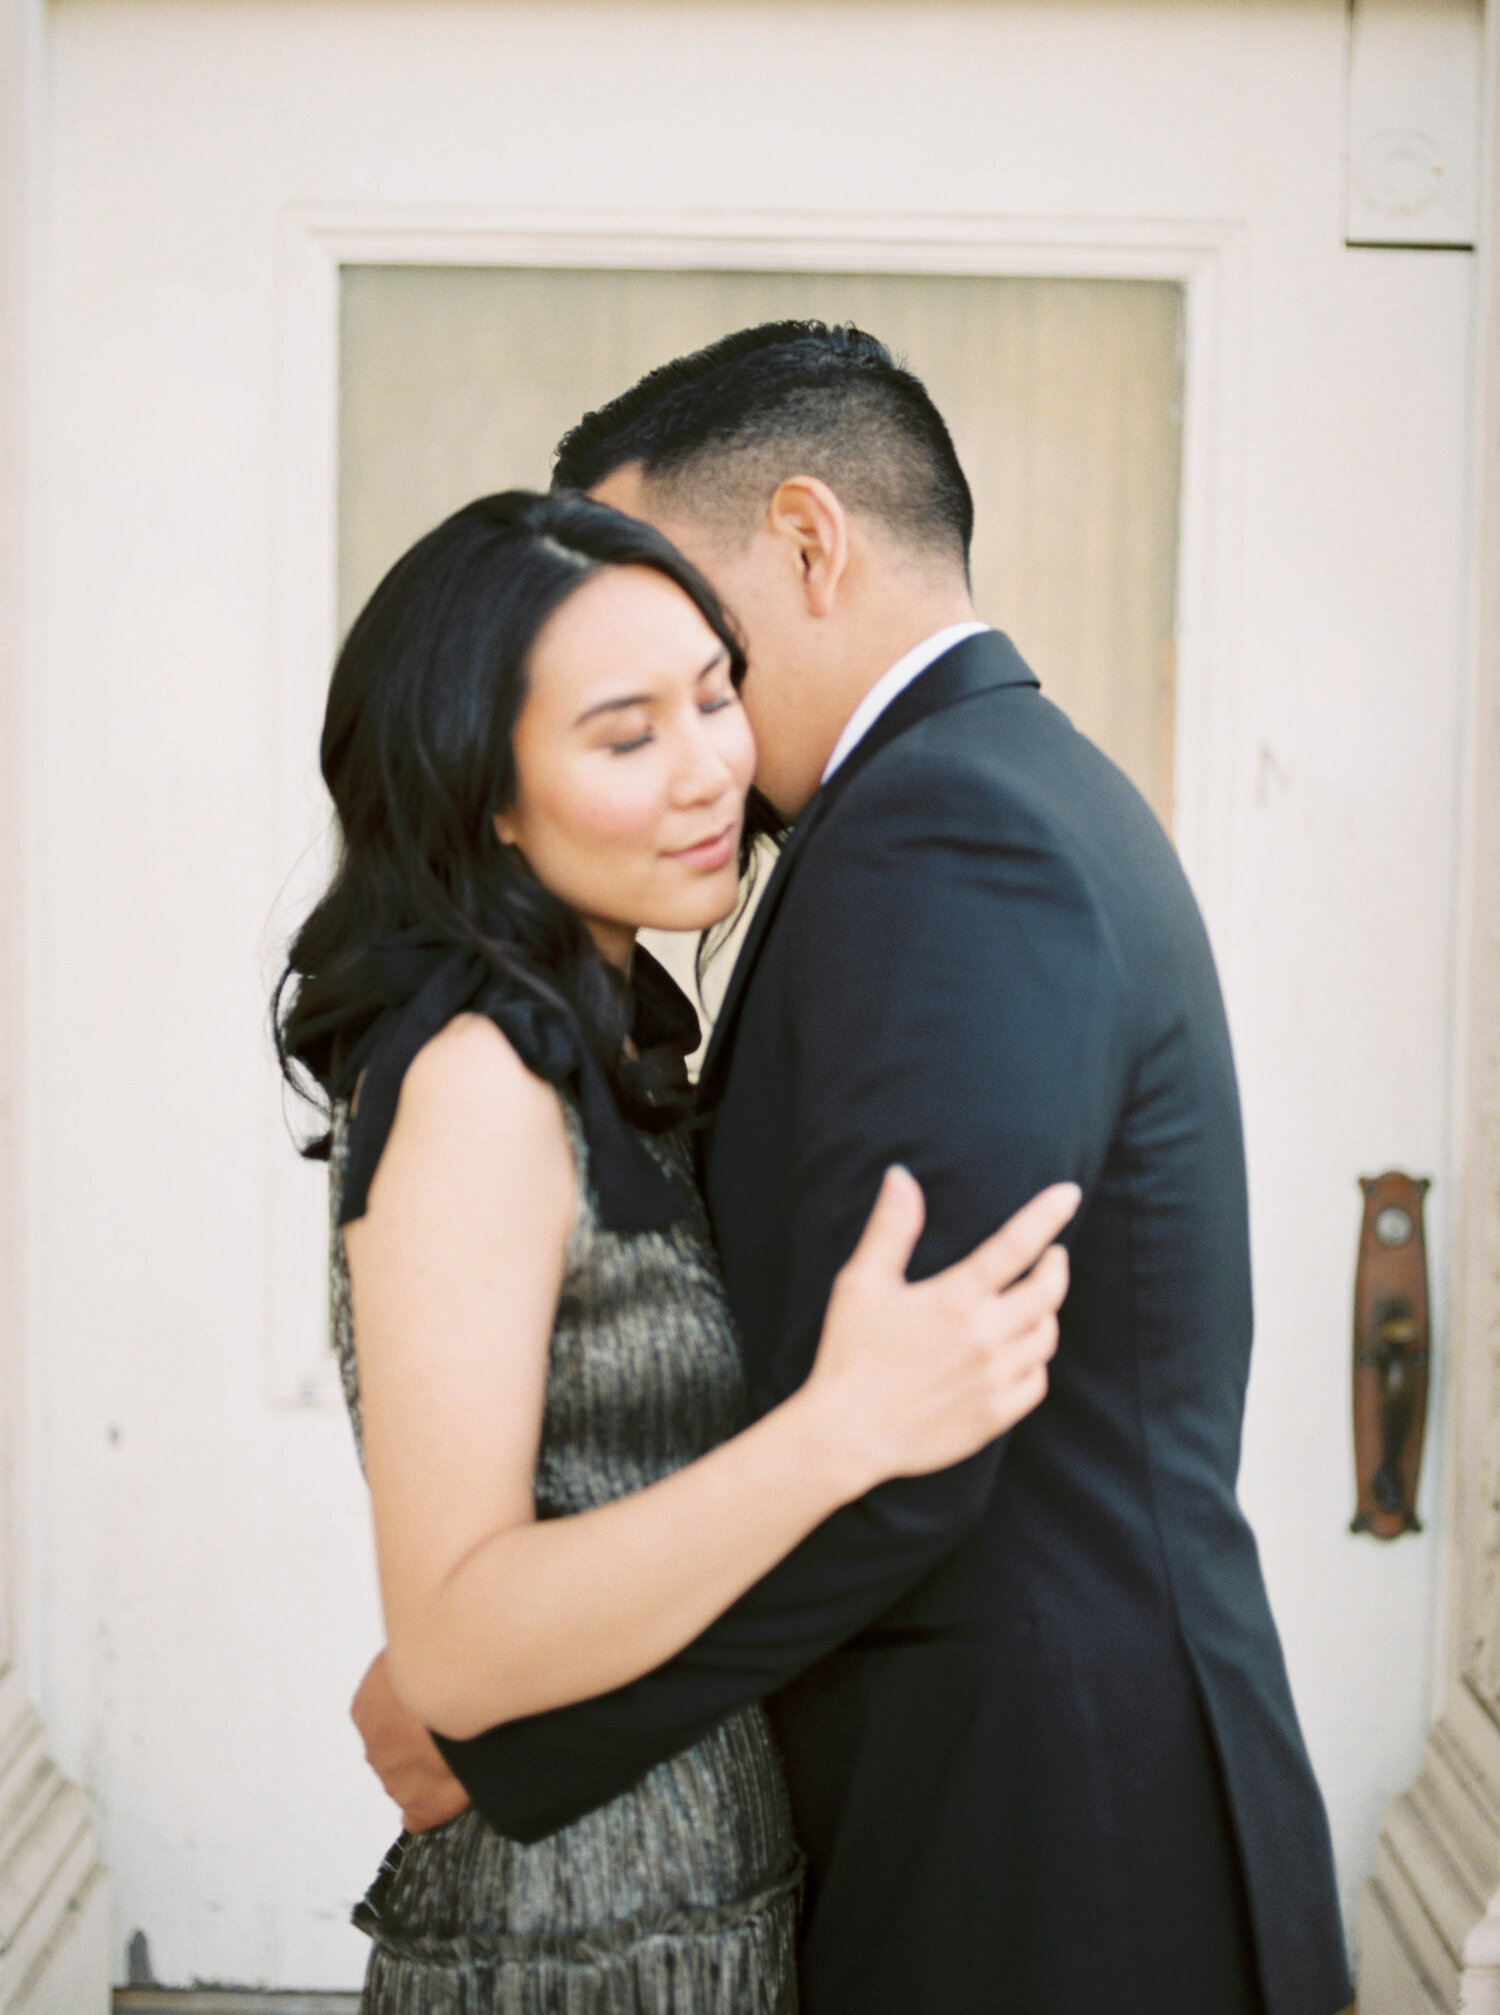 Engagement session on film with stylish gold and black Revolve dress and black suit at Balboa Park in San Diego by Liz Andolina Photography